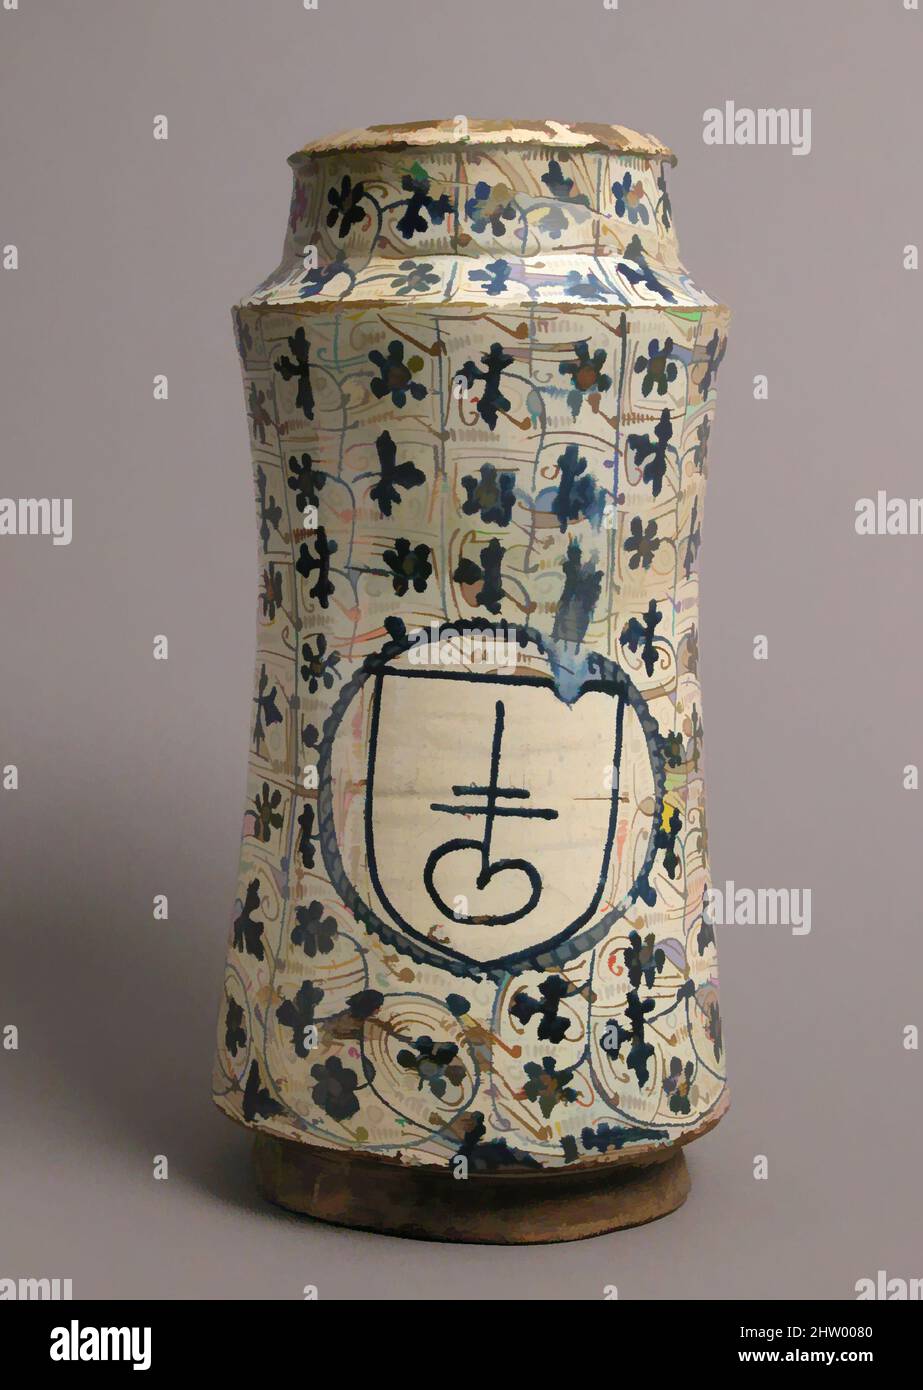 Art inspired by Pharmacy Jar, 16th century, Made in Valencia, Spanish, Earthenware, tin-glaze (lusterware), Overall: 12 5/8 x 6 5/16 in. (32 x 16.1 cm), Ceramics, The albarello, a vessel introduced to Spain from the Near East through the spice trade, was rapidly adopted by Valencian, Classic works modernized by Artotop with a splash of modernity. Shapes, color and value, eye-catching visual impact on art. Emotions through freedom of artworks in a contemporary way. A timeless message pursuing a wildly creative new direction. Artists turning to the digital medium and creating the Artotop NFT Stock Photo